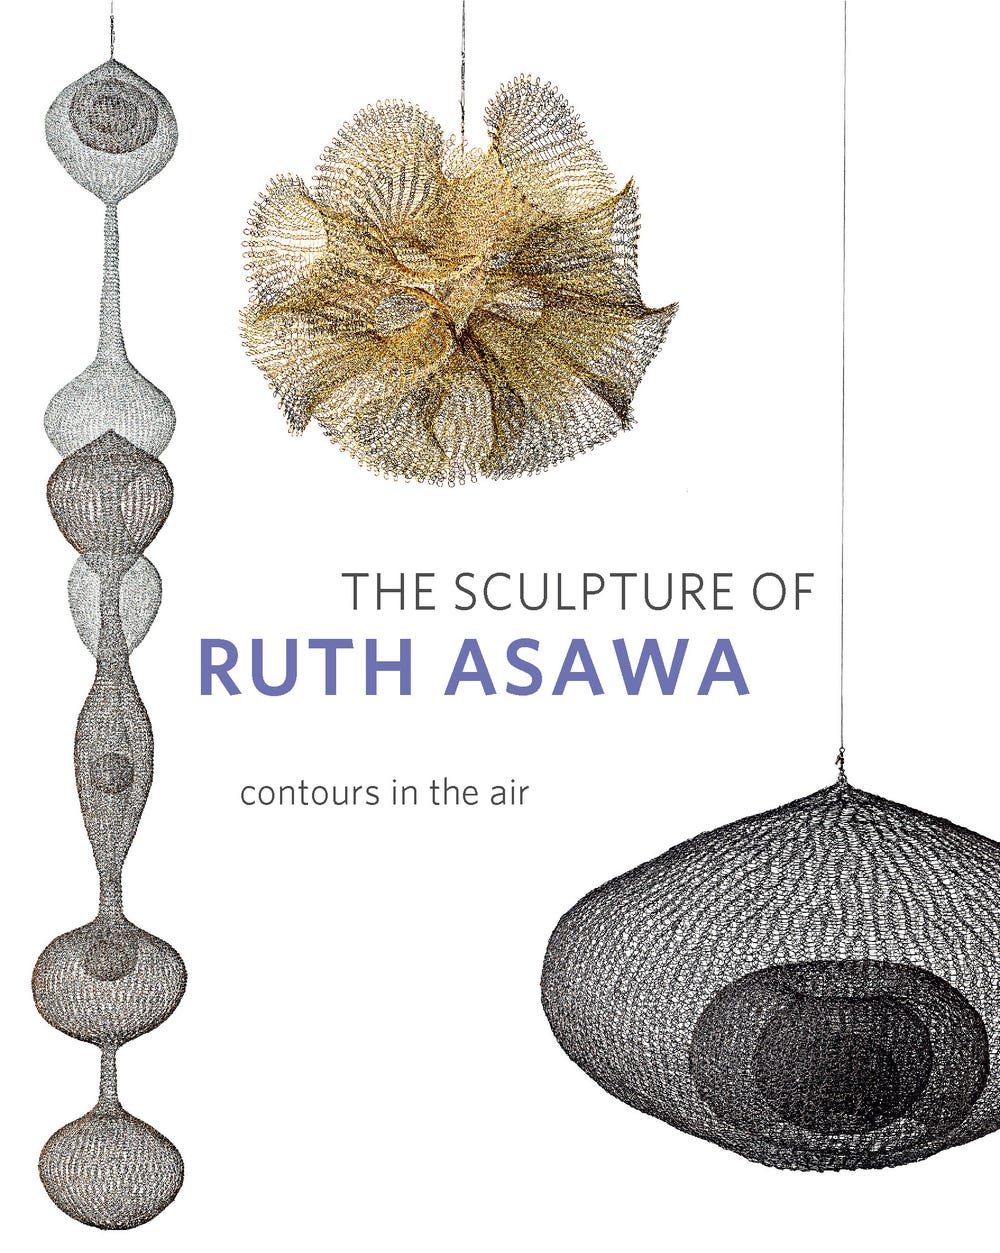 Book jacket featuring geometric sculptures with "The Sculpture of Ruth Asawa" text